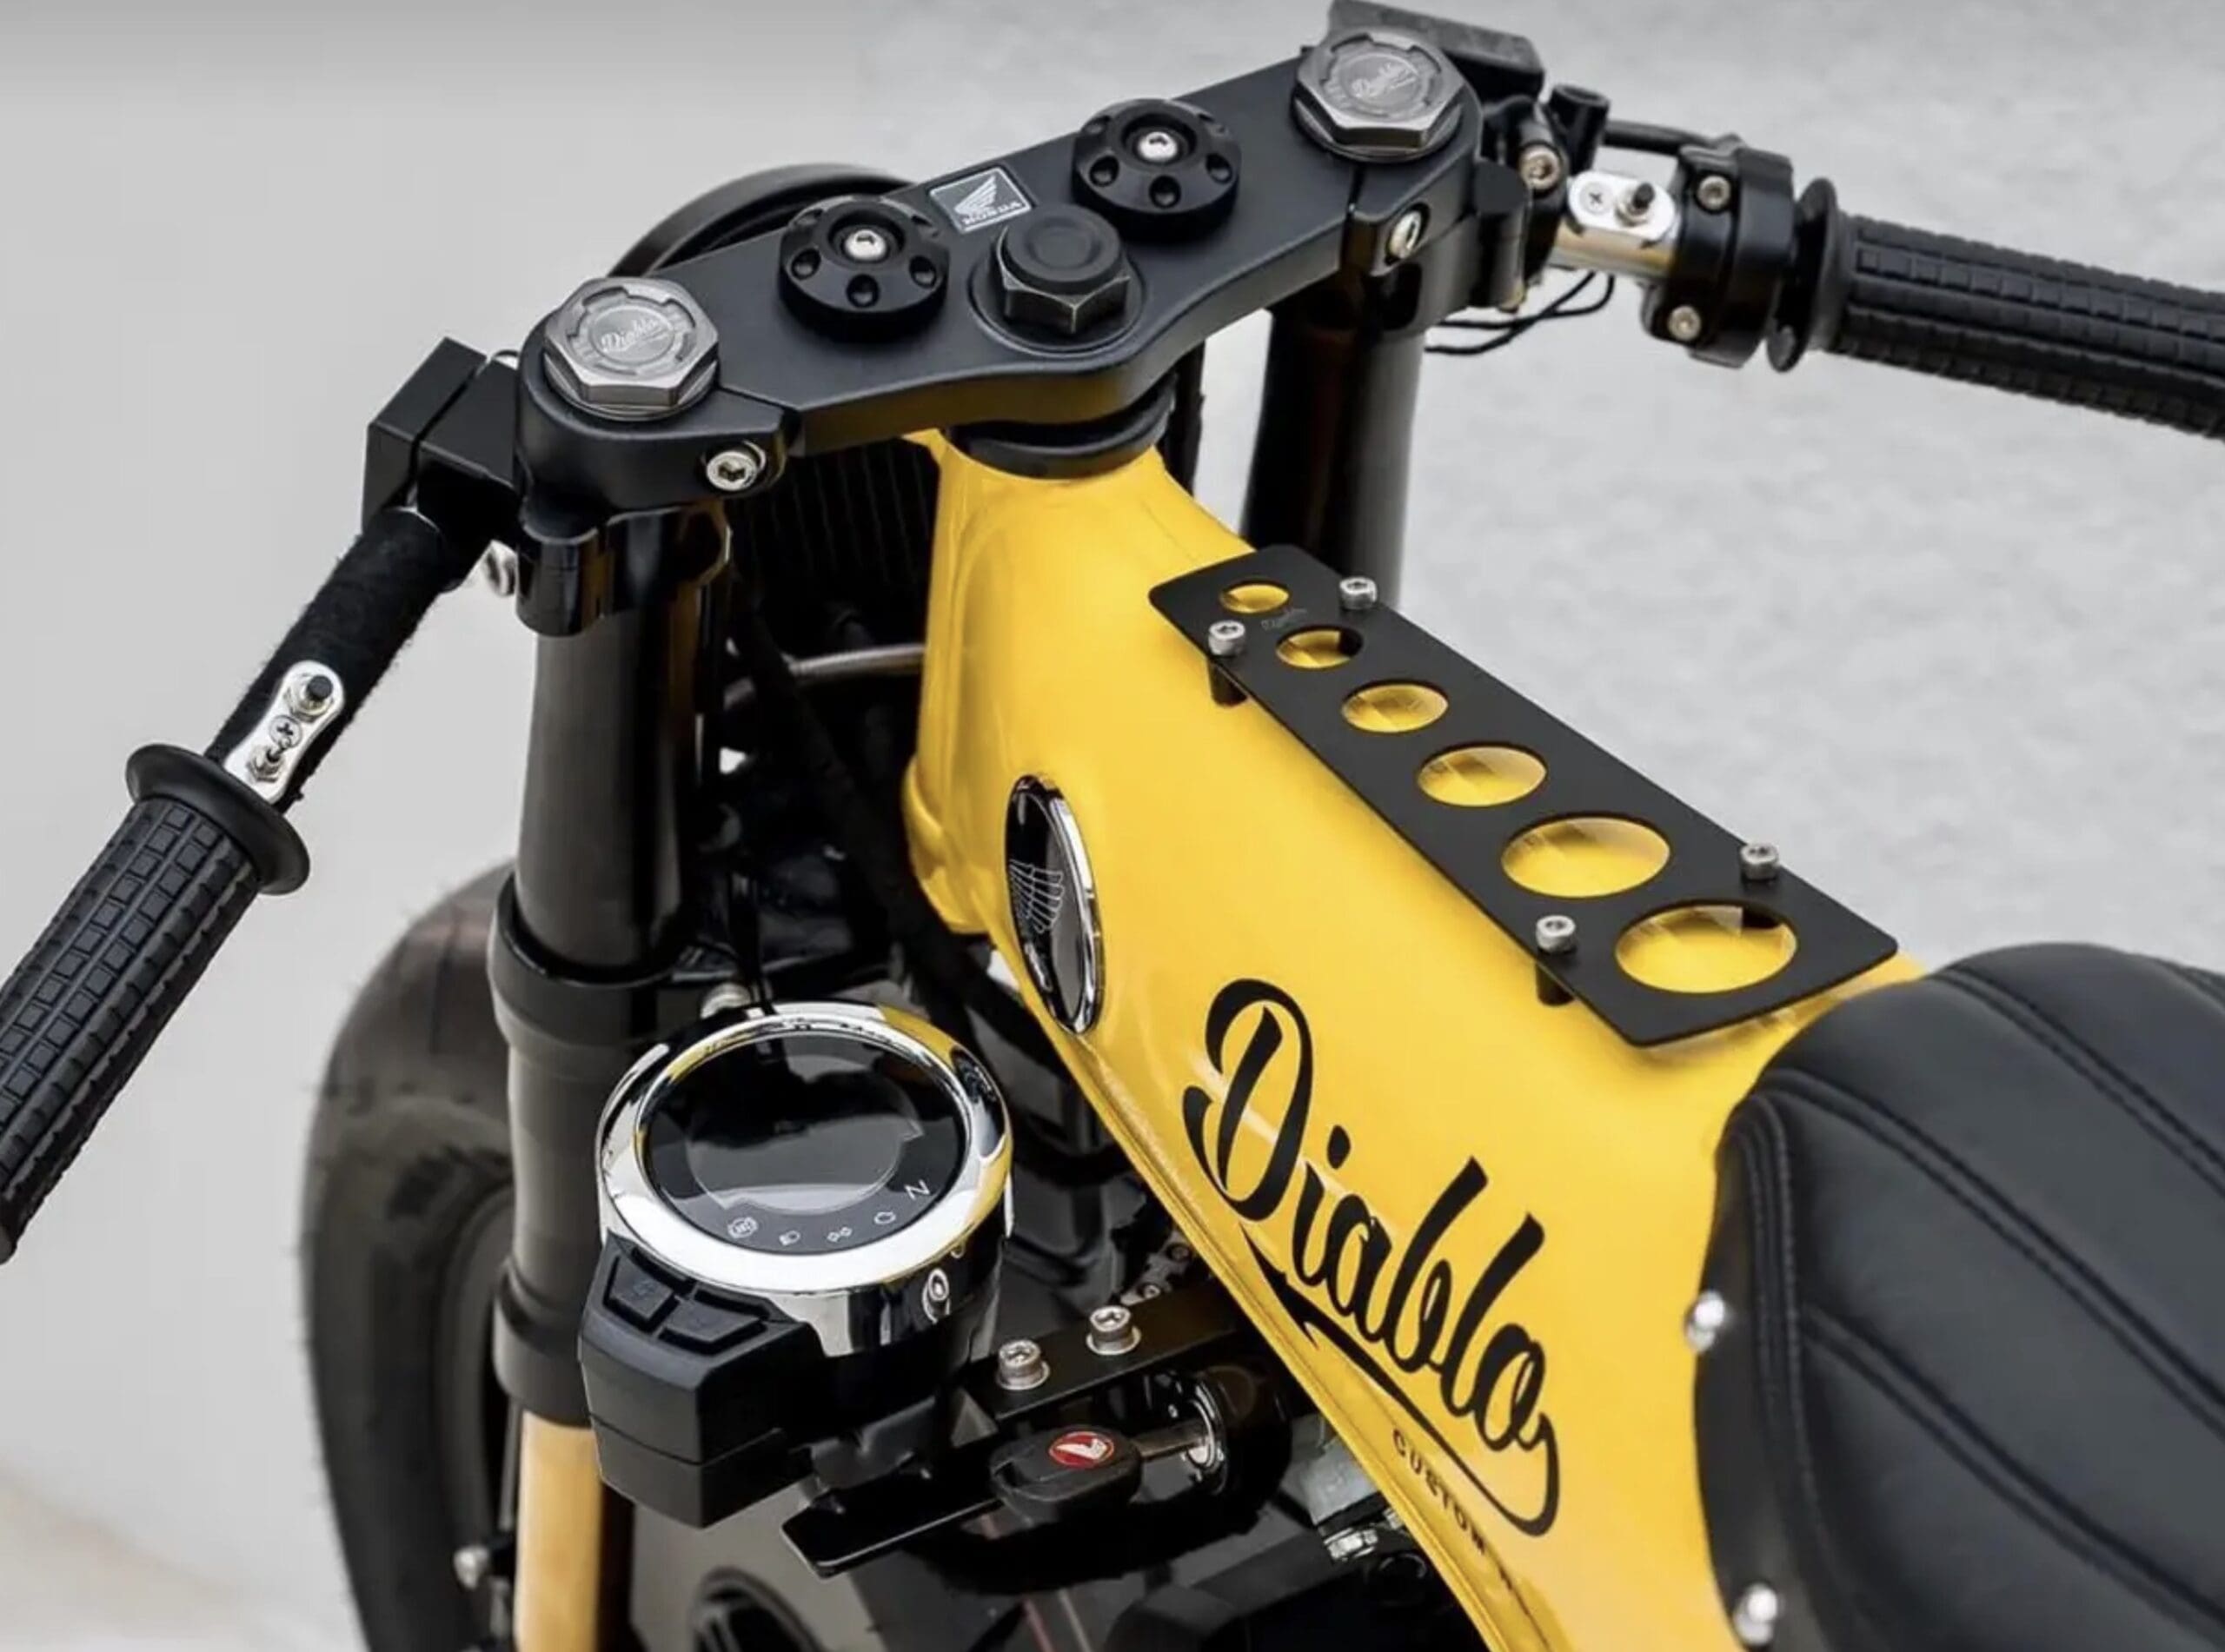 "Daxxer," a custom Honda Dax 125 from the garage of Thai-based K-Speed. Media sourced from Top Speed.